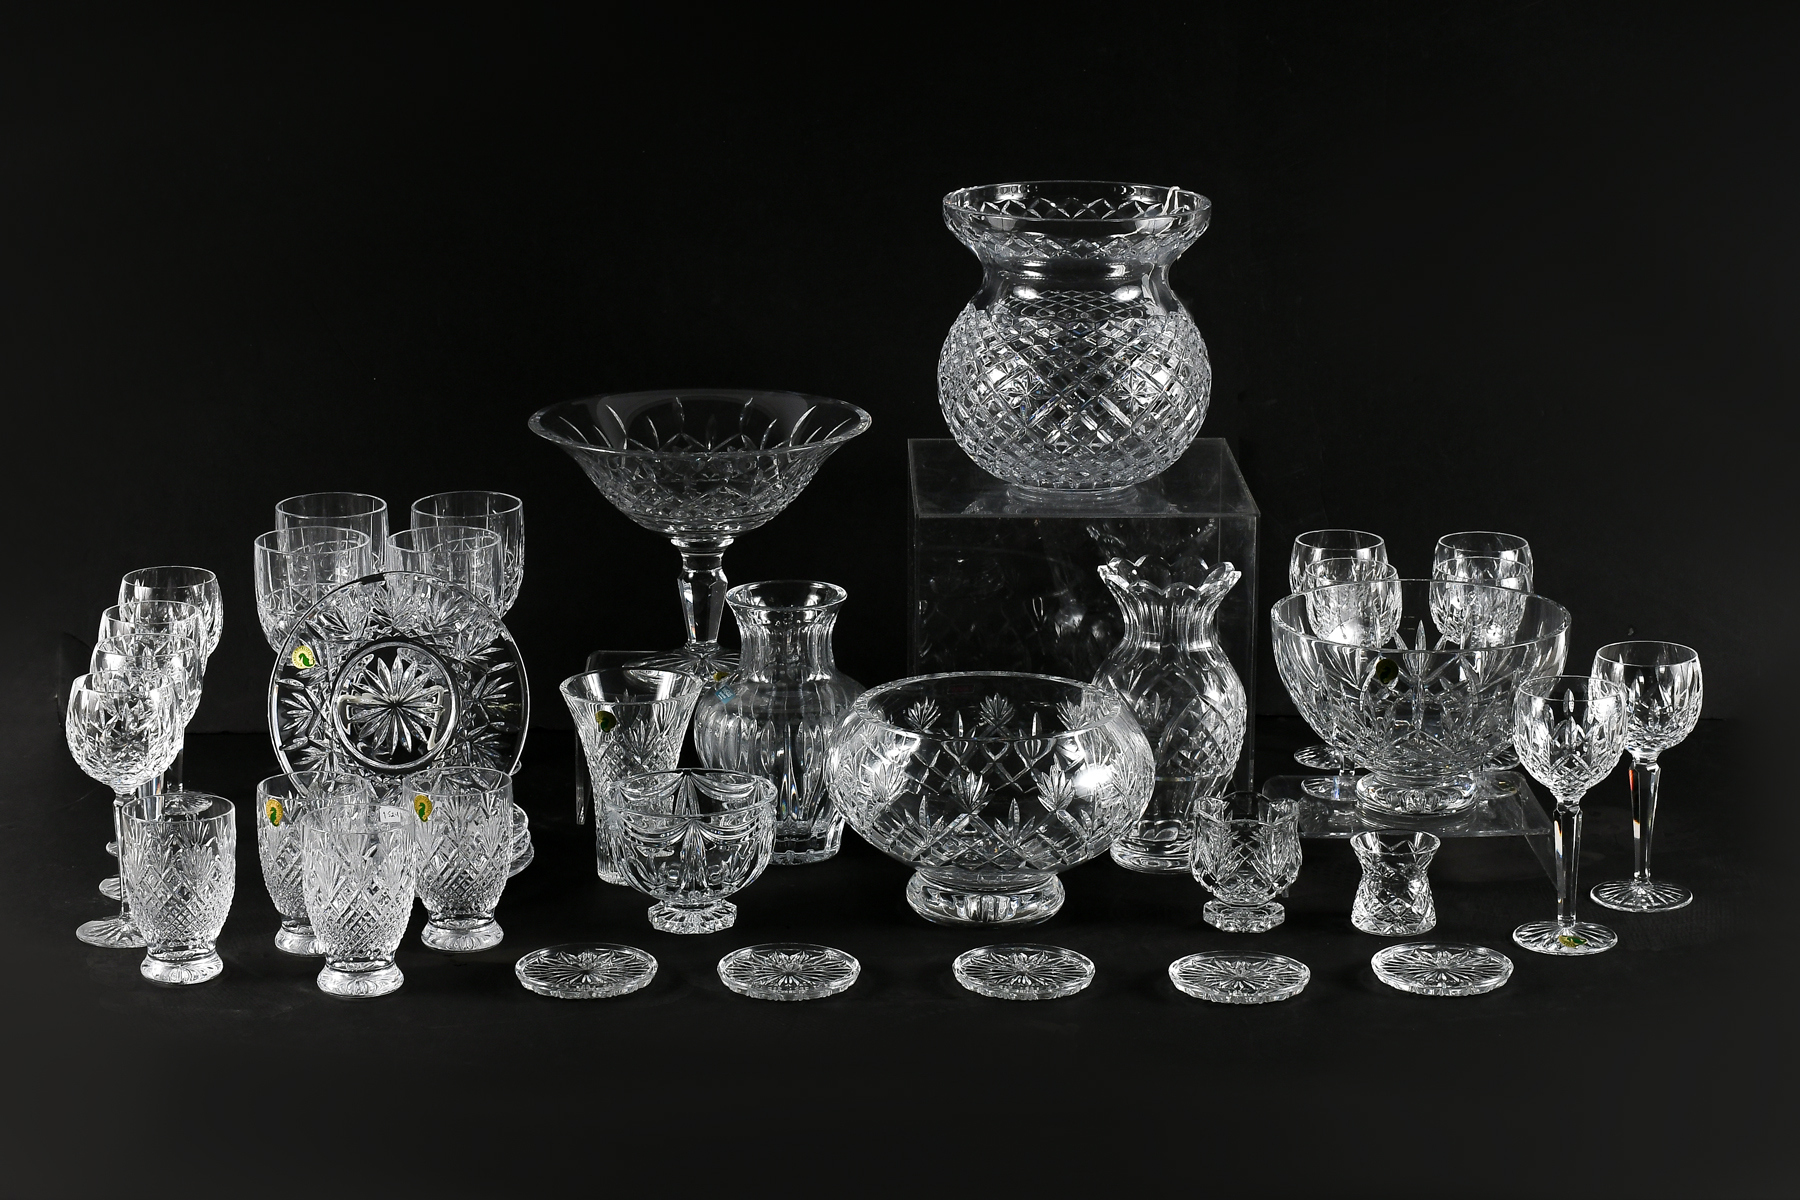 LARGE WATERFORD CRYSTAL COLLECTION  30a14f